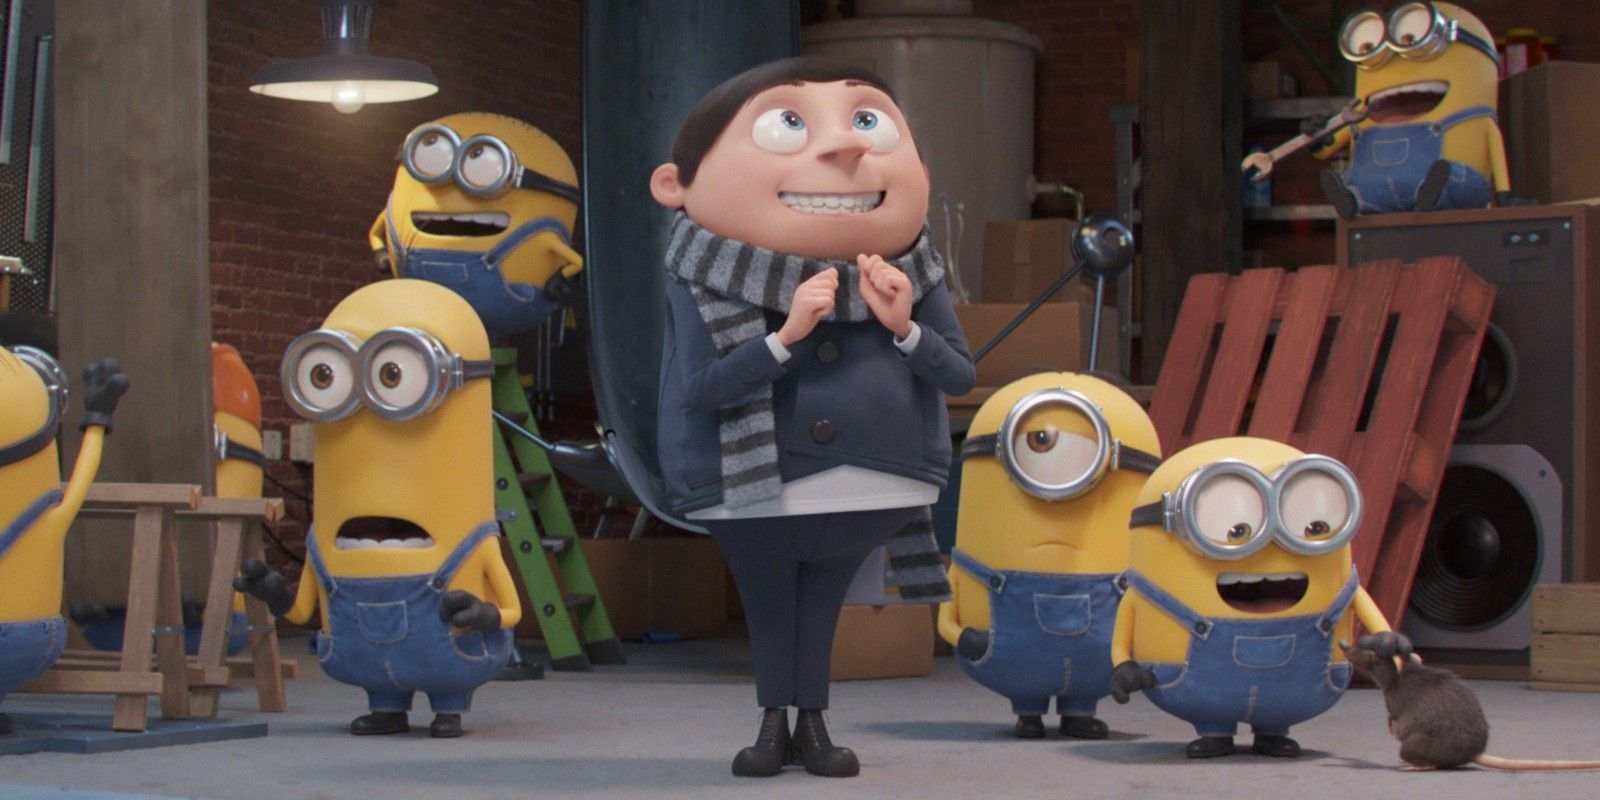 Voices of Pierre Coffin and Steve Carell in Minions The Rise of Gru